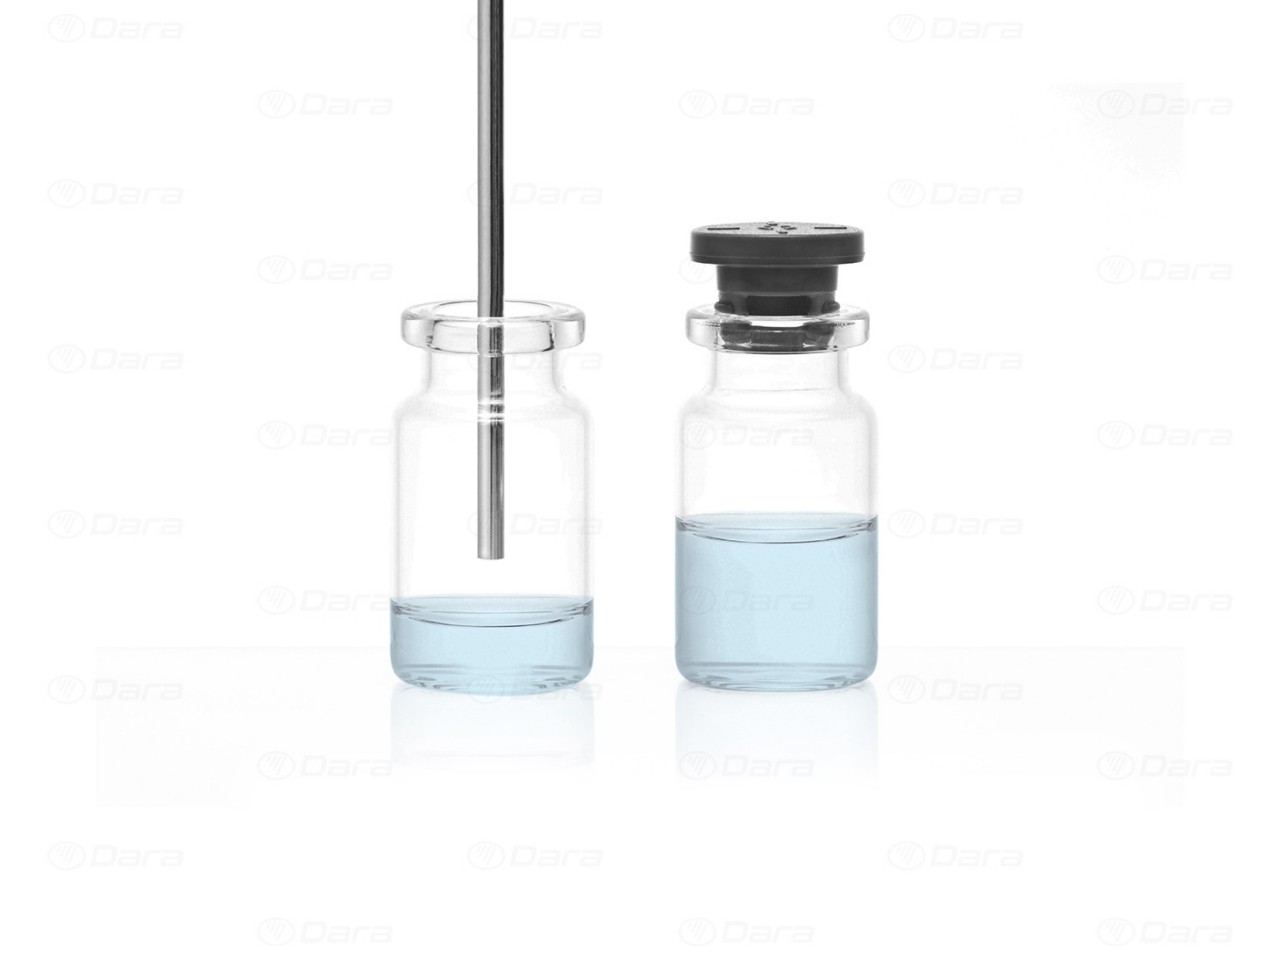 Fillers - cappers for injectable and lyophilized vials